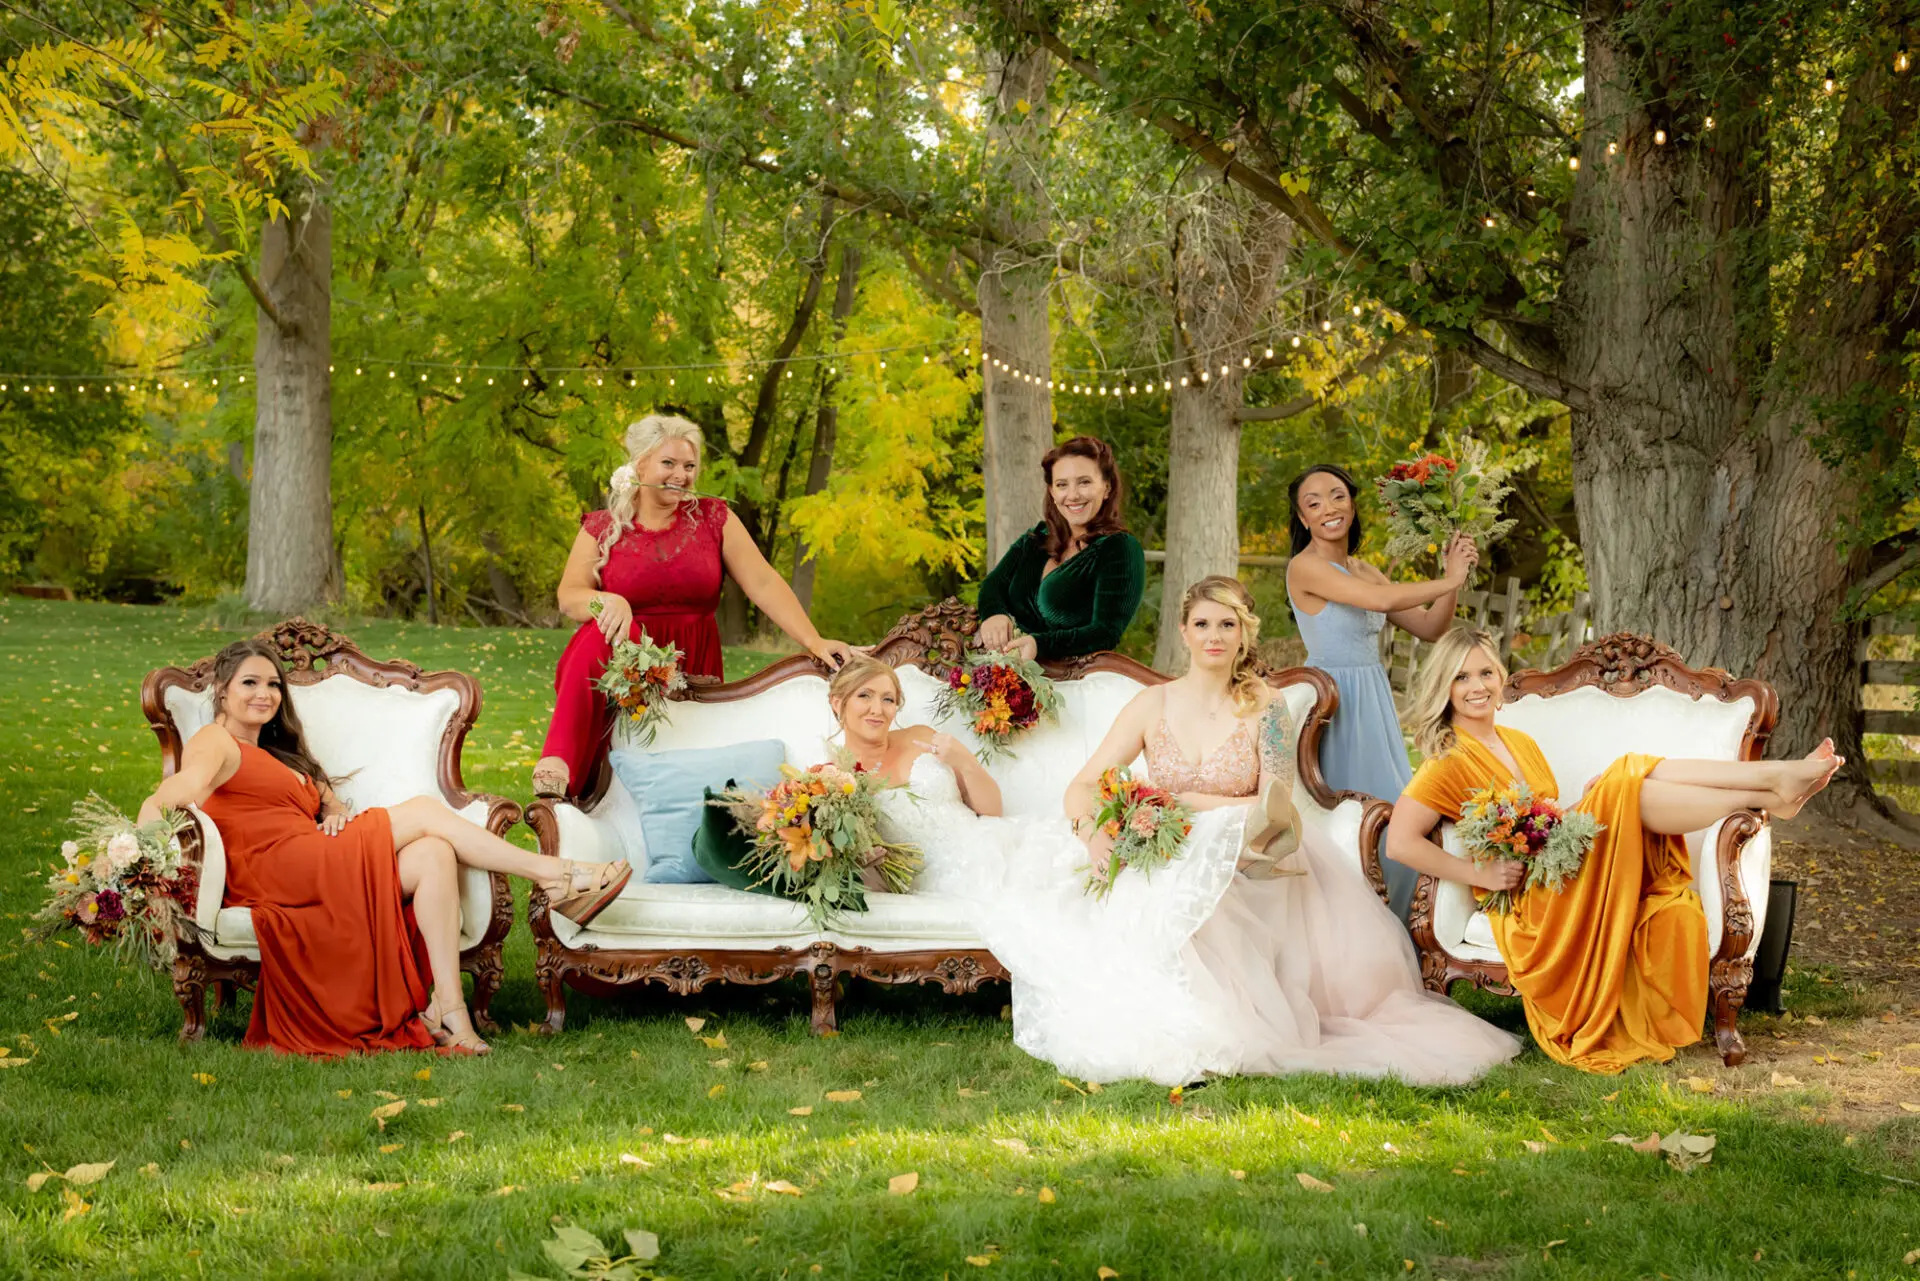 A themed photo of the bride and the bridesmaids